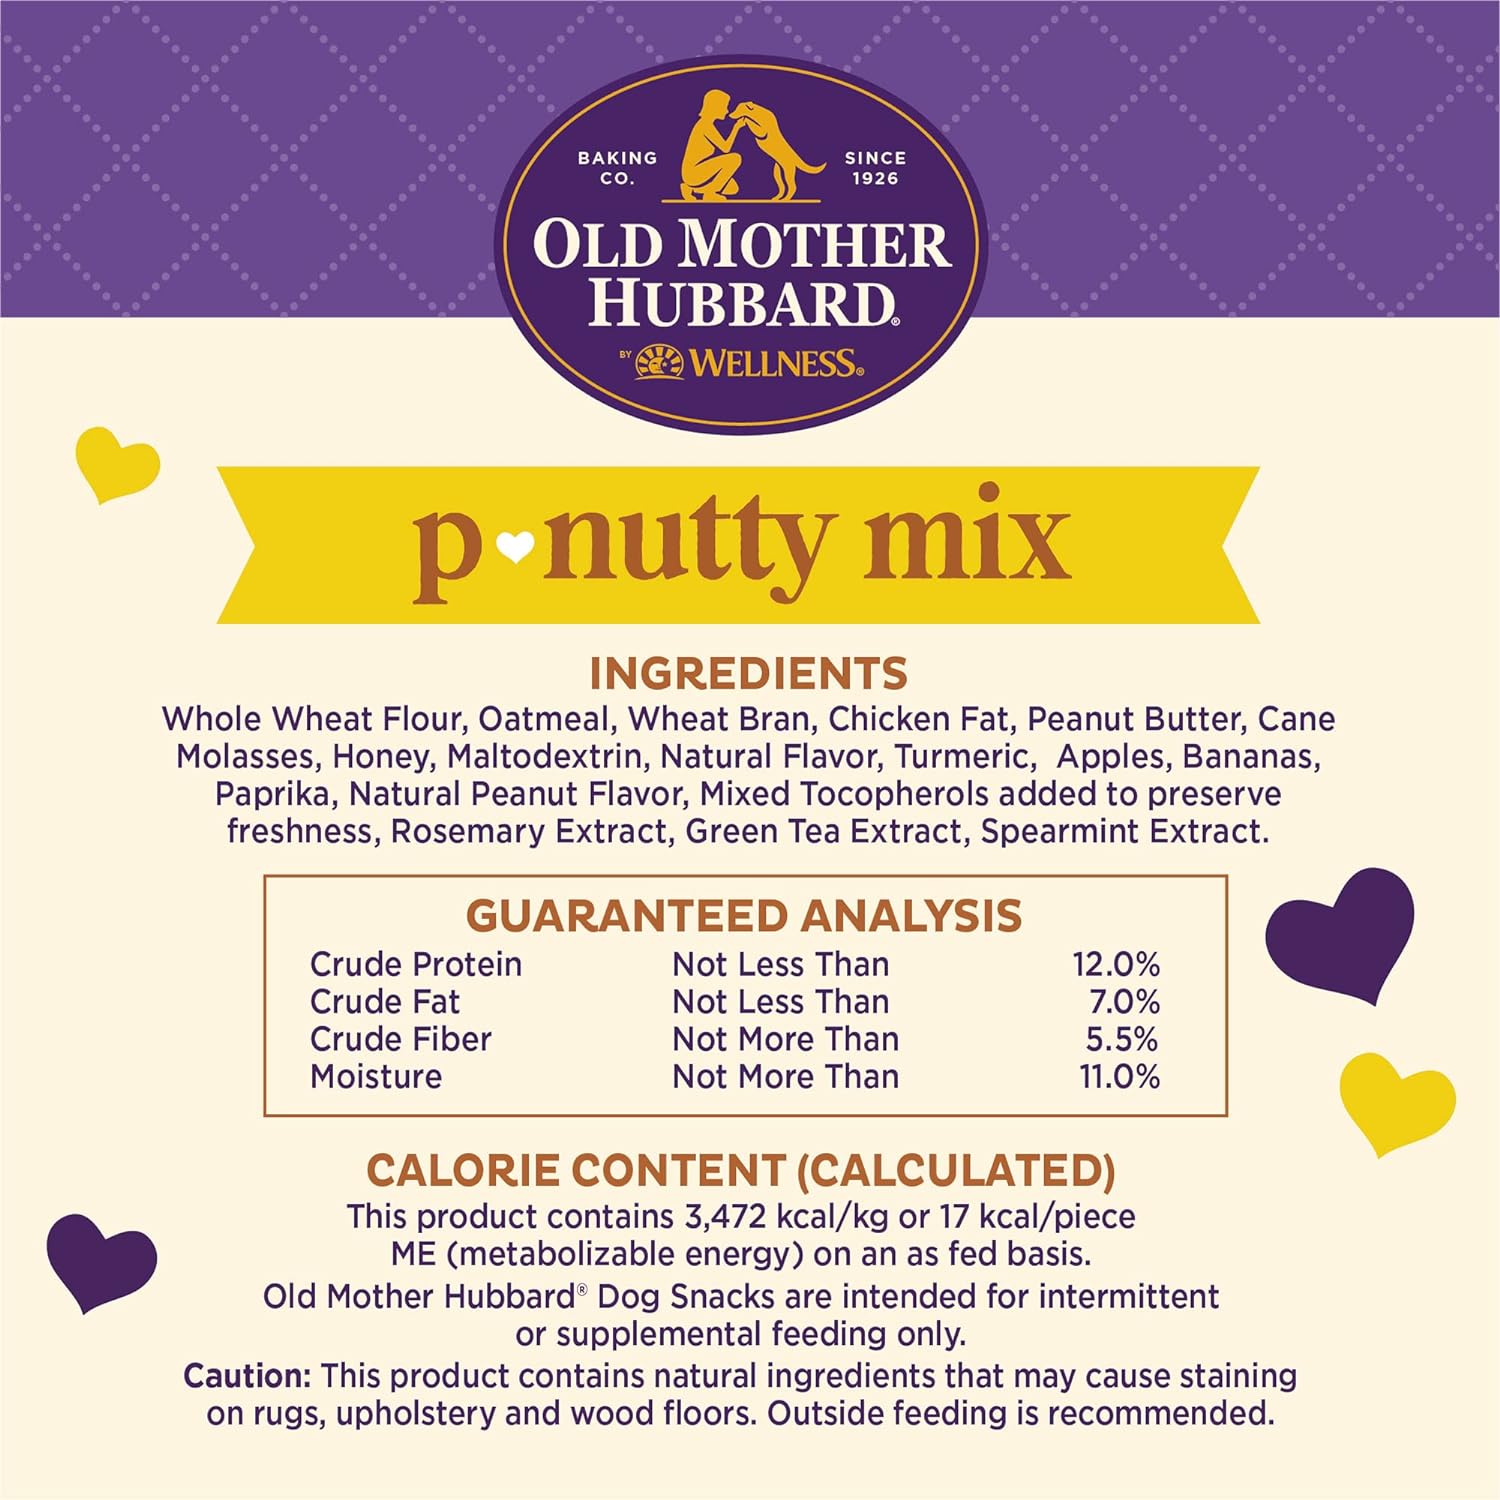 Old Mother Hubbard by Wellness P-Nutty Assorted Mix Natural Dog Treats, Crunchy Oven-Baked Biscuits, Ideal for Training, Small Size, 20 pound box